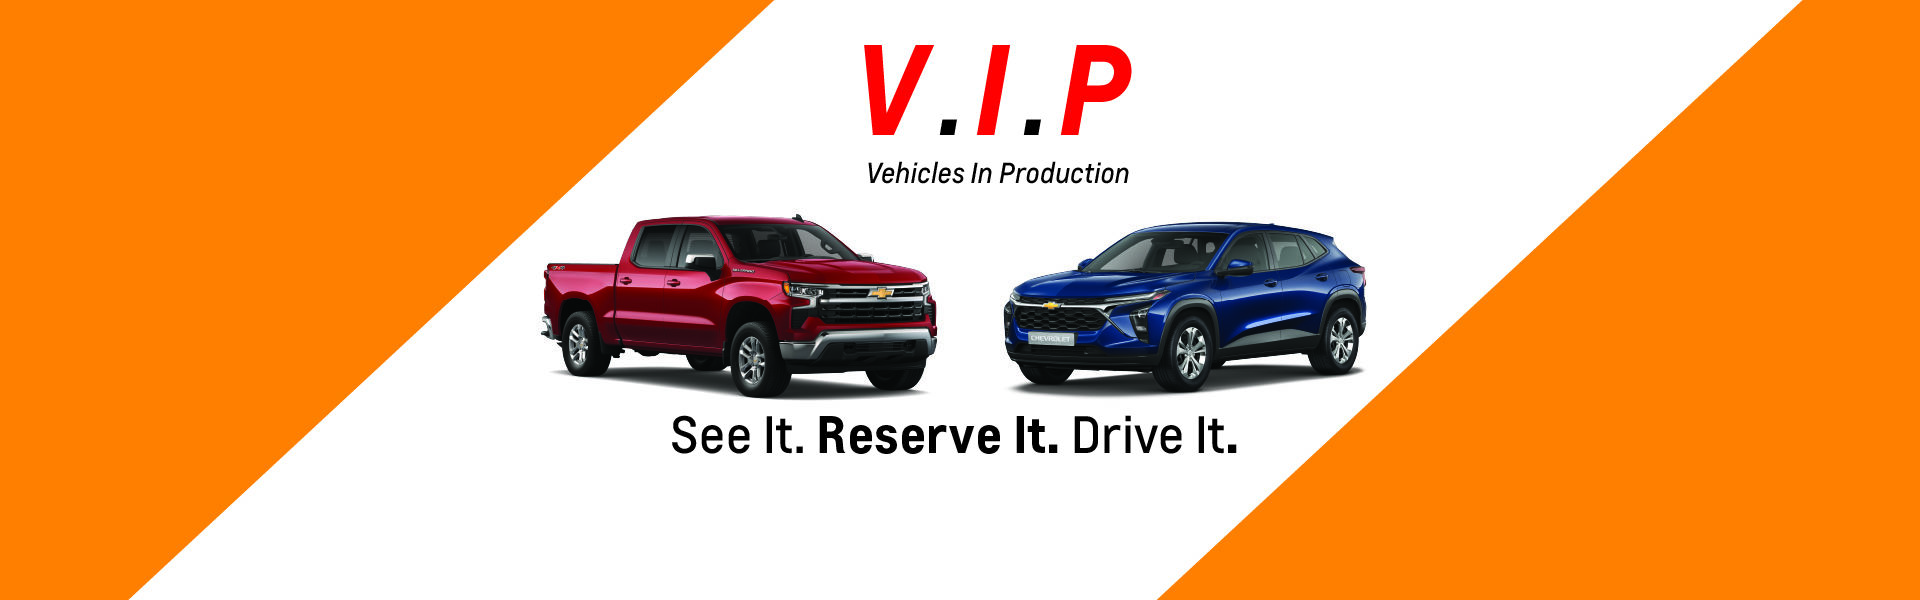 VIP Vehicles in Production